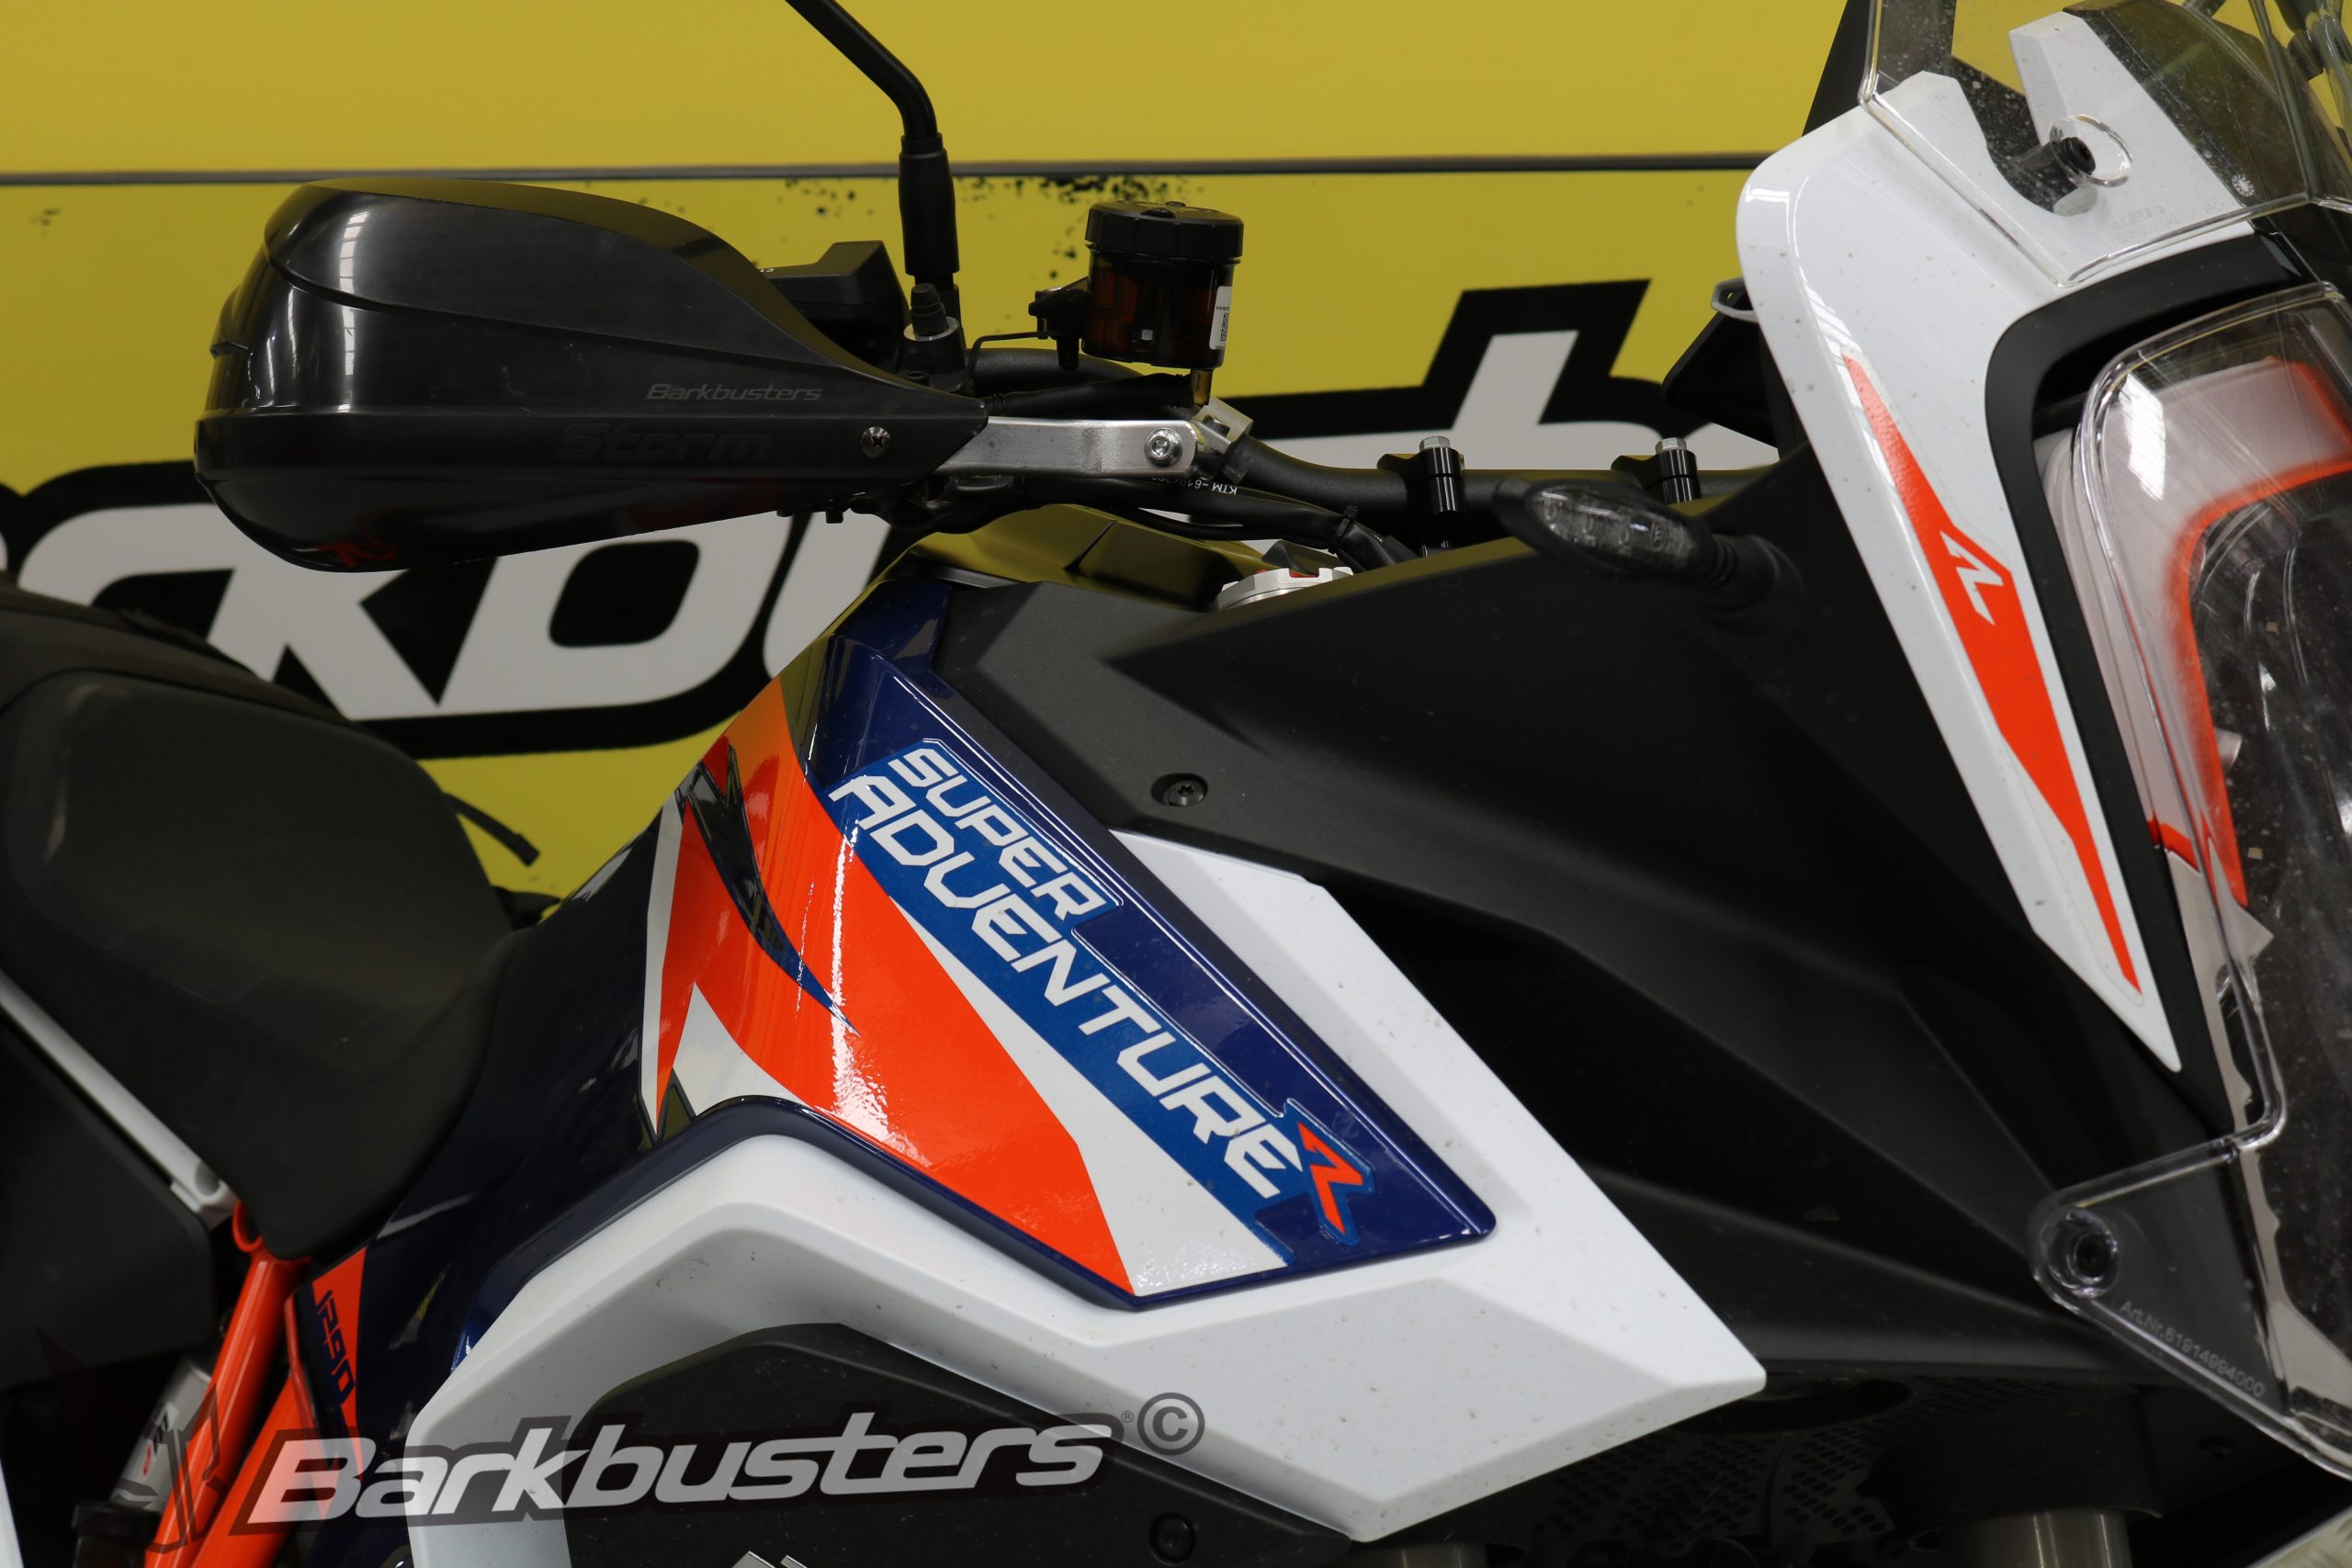 BARKBUSTERS Handguard Hardware Kit (Code: BHG-107-00) fitted to KTM SUPER ADVENTURE R with STORM Guards